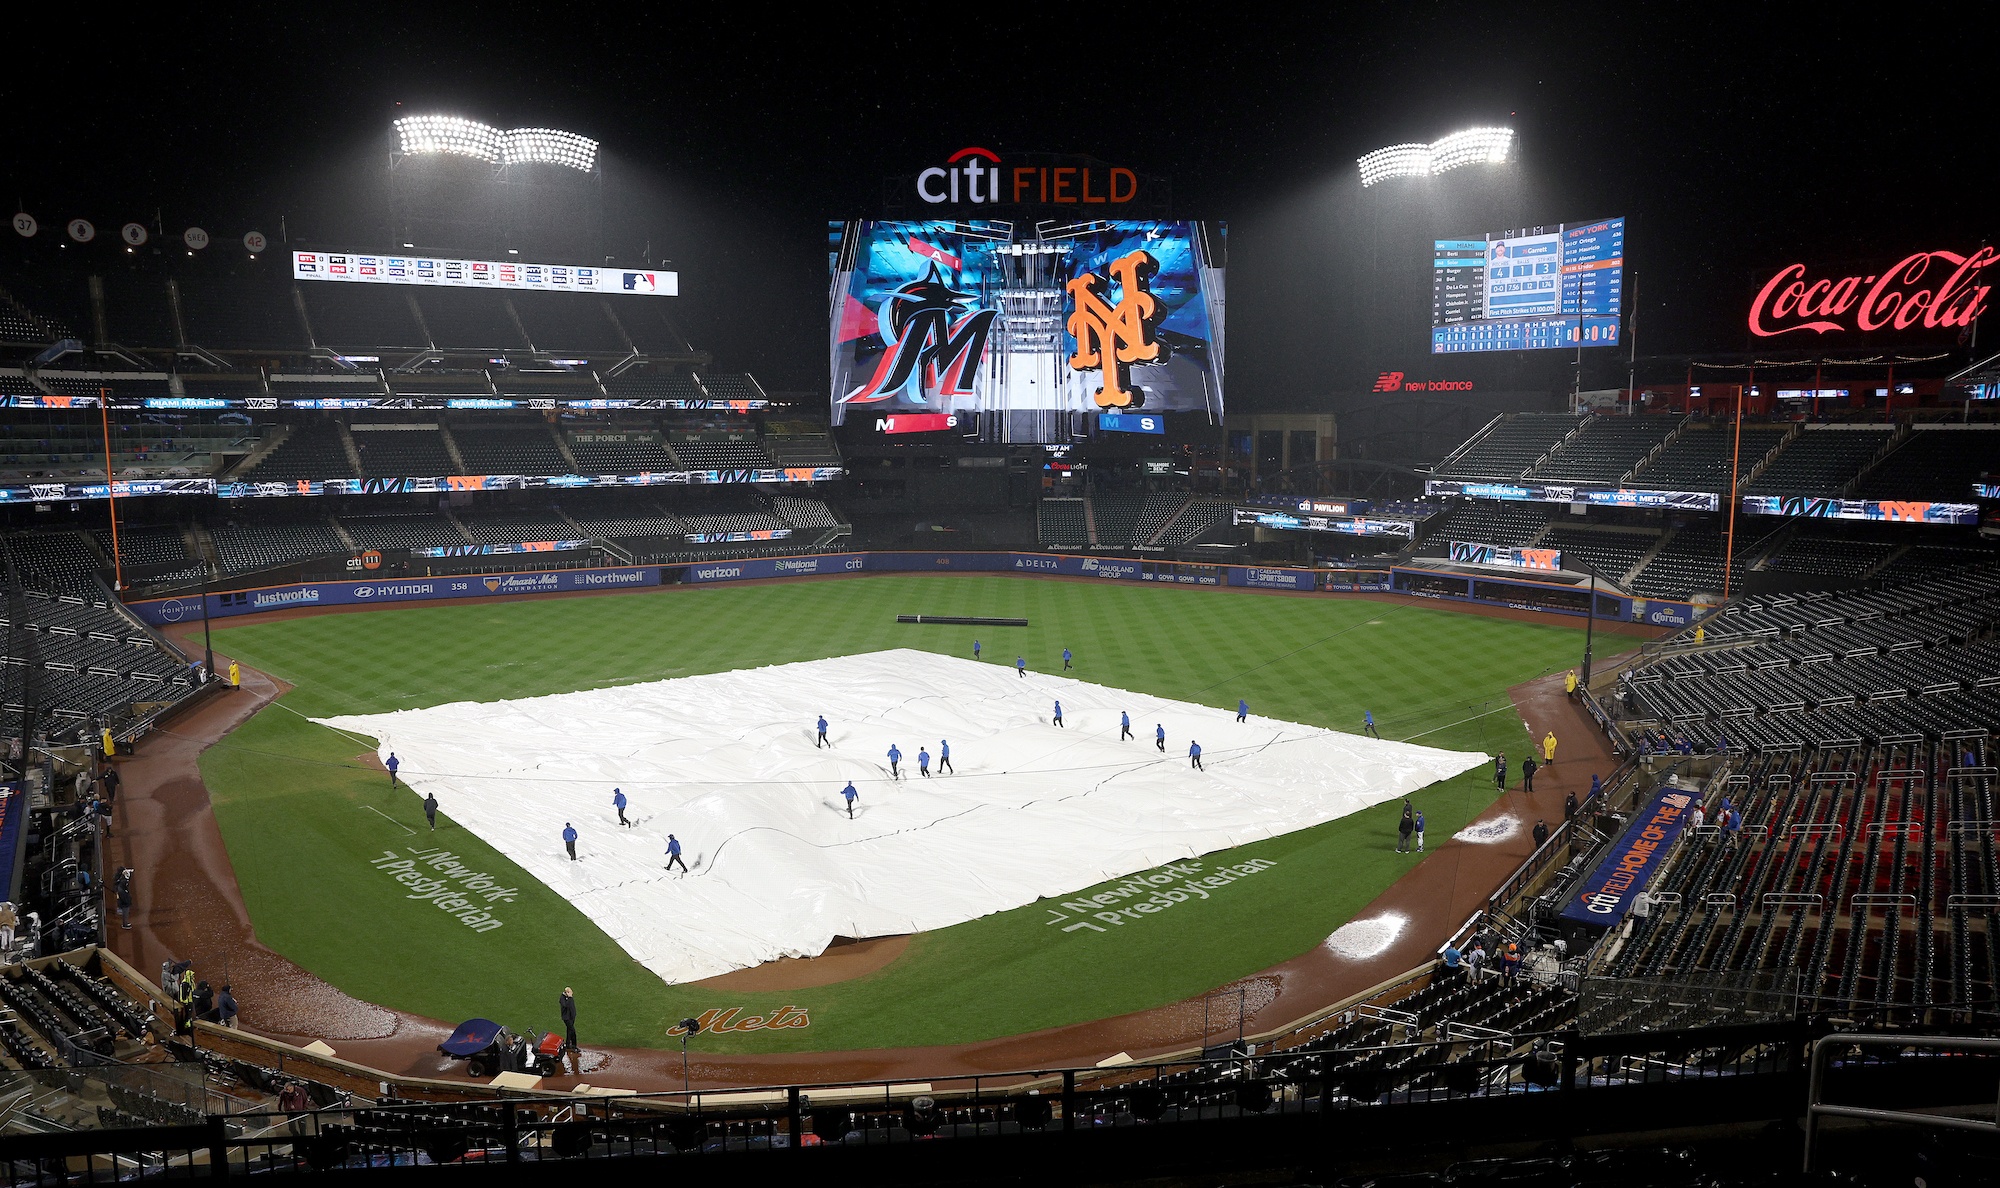 NEW YORK, NEW YORK - SEPTEMBER 28: The Grounds crew pull the tarp back on the field at Citi Field on September 28, 2023 in the Flushing neighborhood of the Queens borough of New York City. (Photo by Elsa/Getty Images)